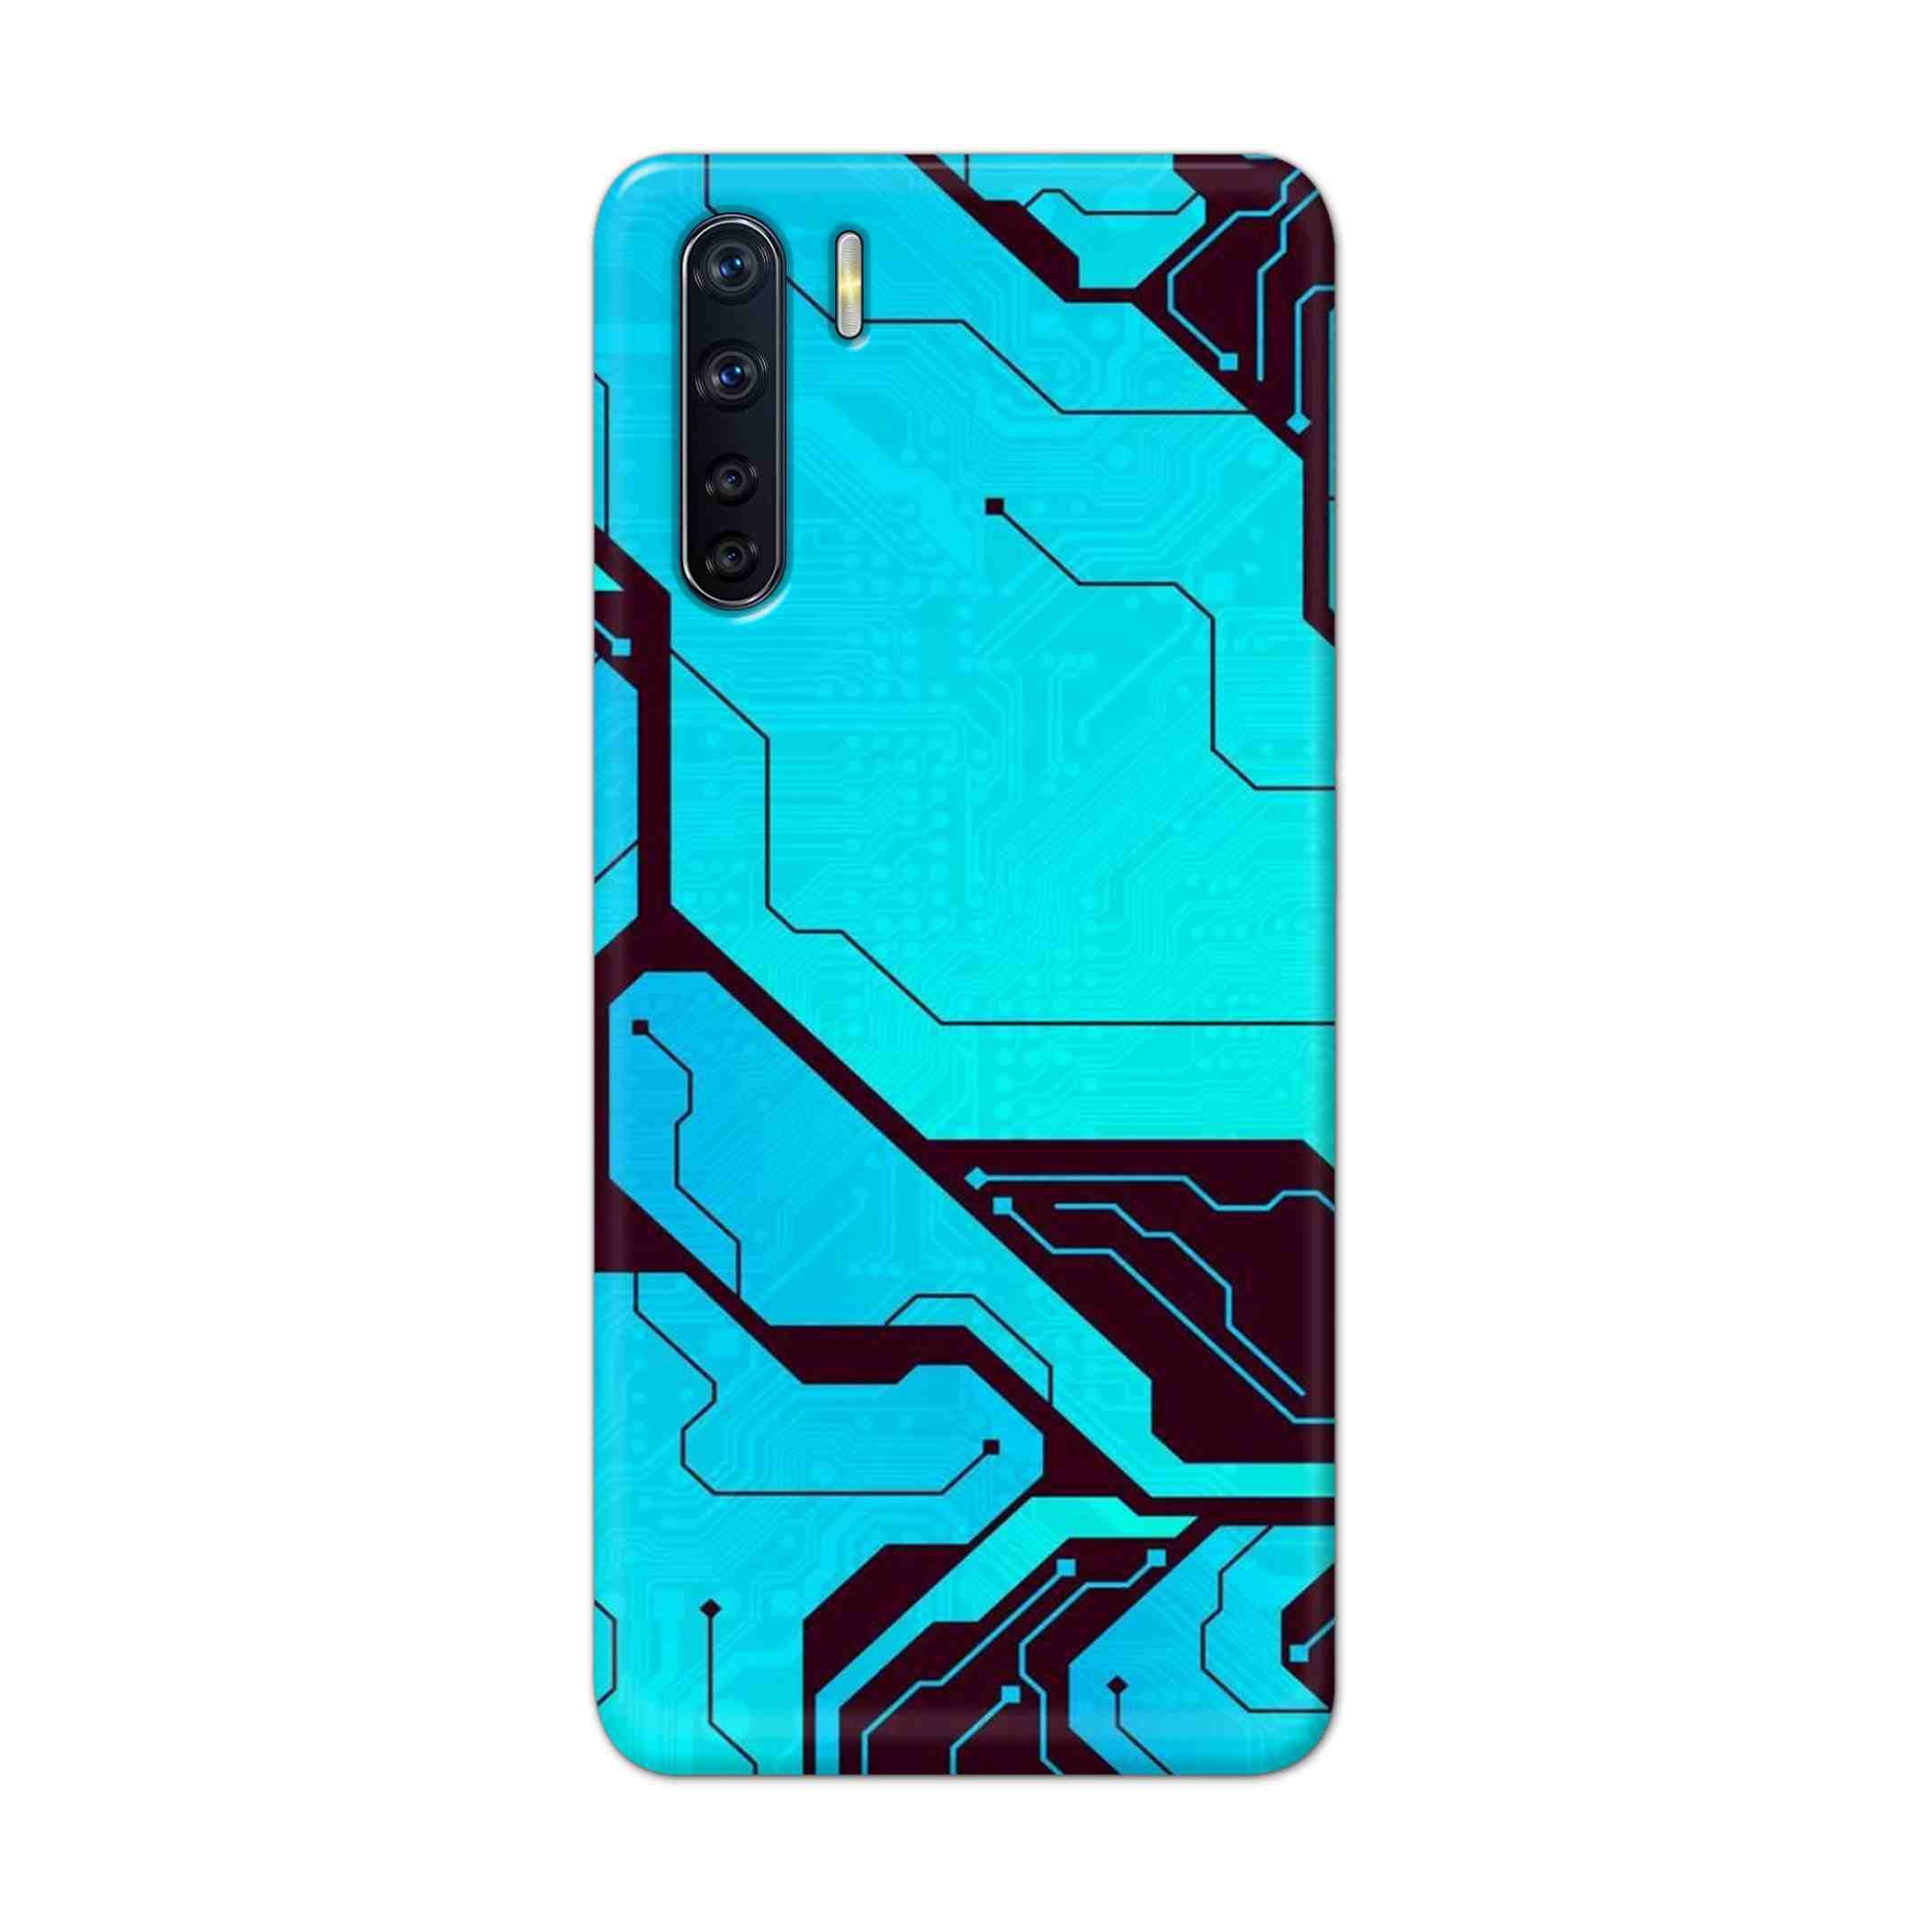 Buy Futuristic Line Hard Back Mobile Phone Case Cover For OPPO F15 Online